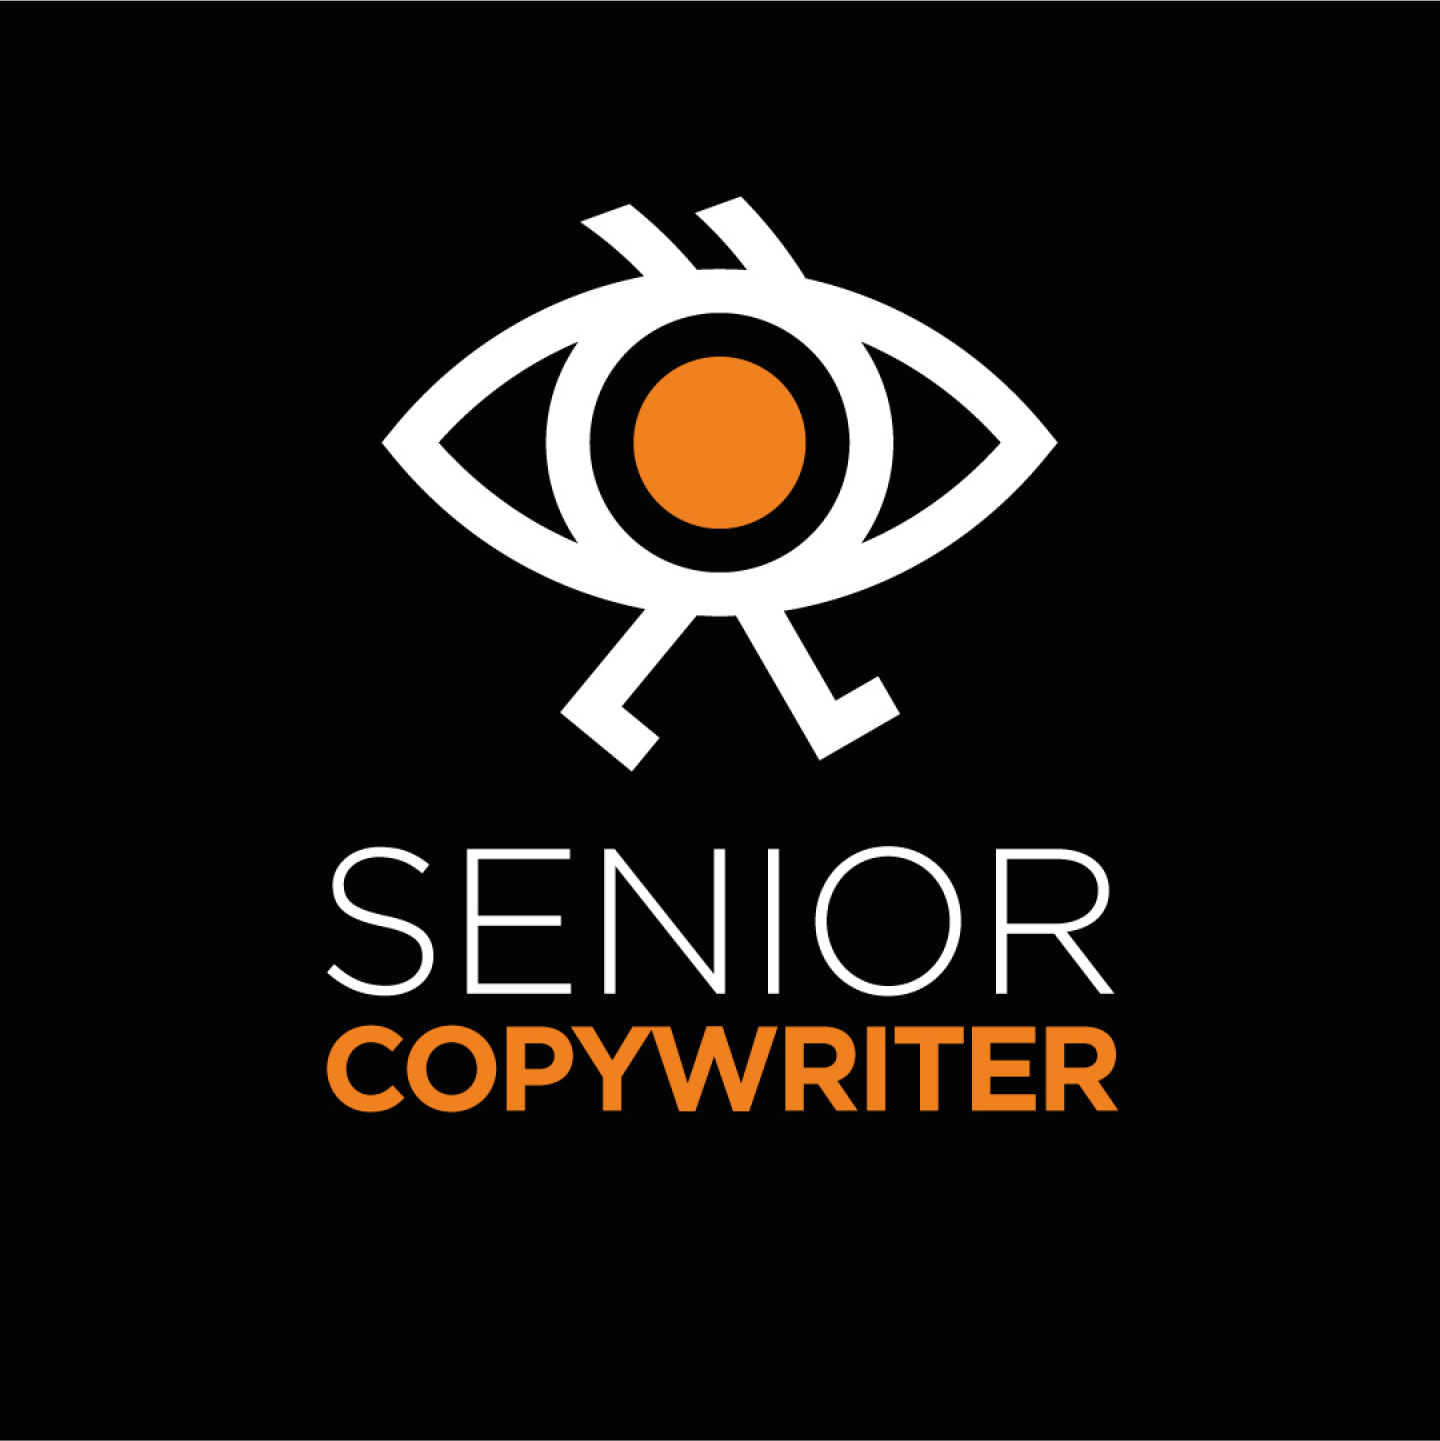 We are looking for NEW SENIOR COPYWRITER